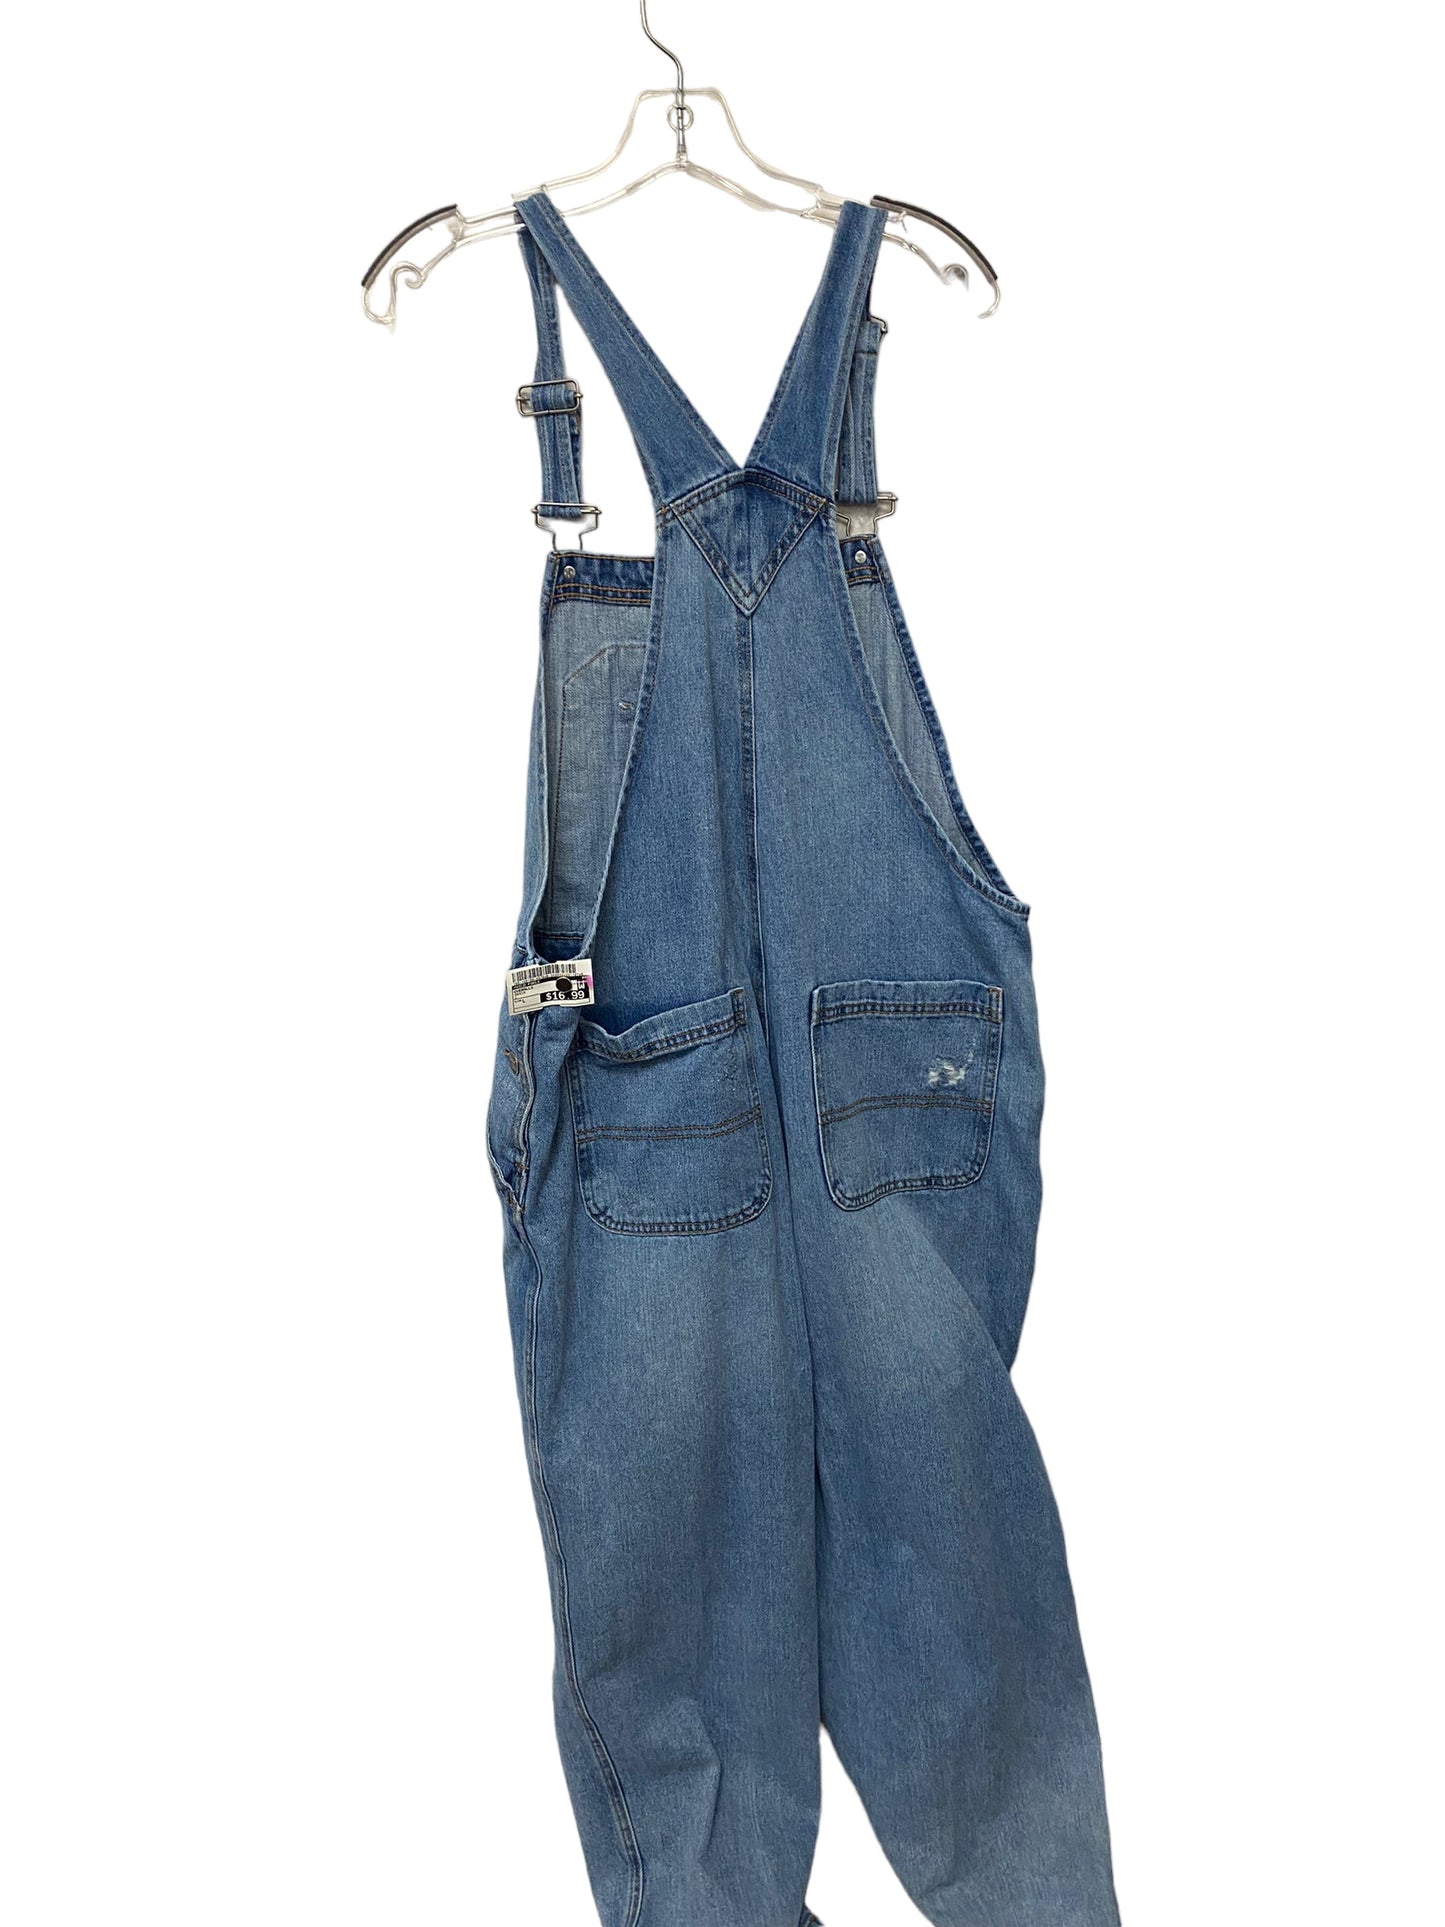 Overalls By Wild Fable  Size: L